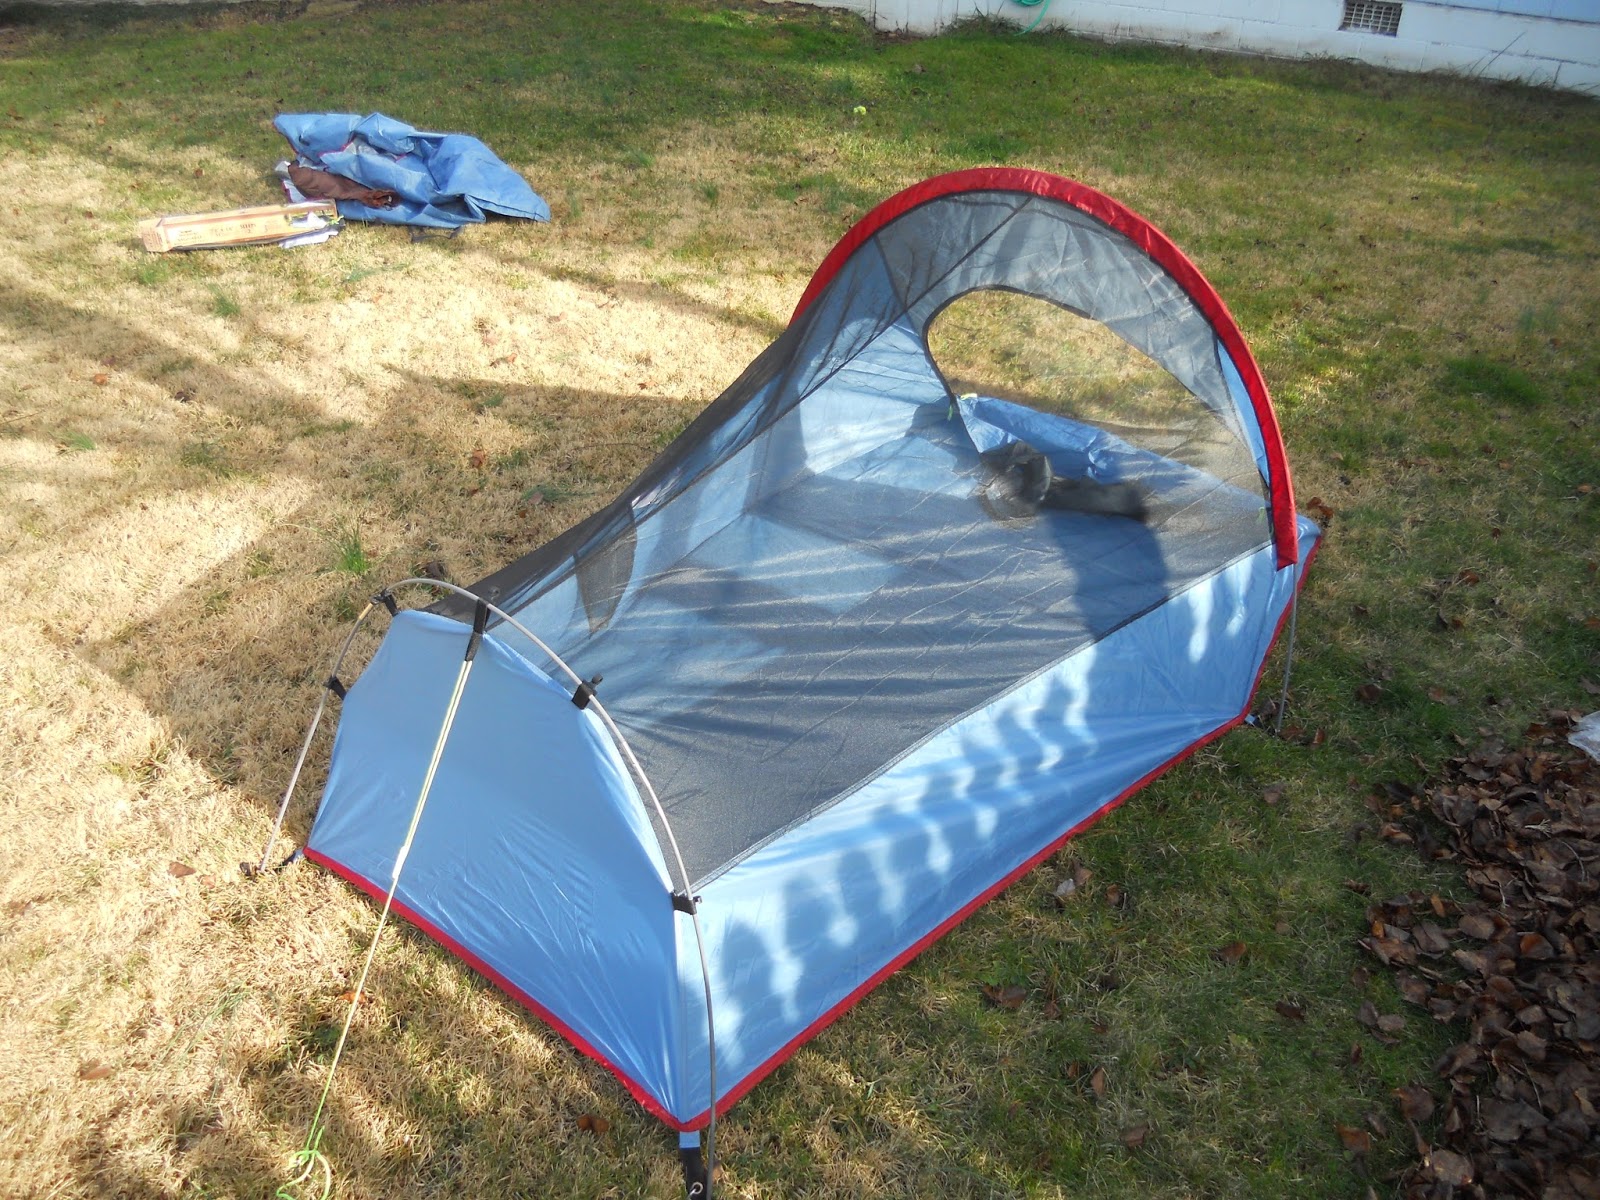 Texsport Saguaro Bivy Shelter Tent from Starboard Side Looking Forward